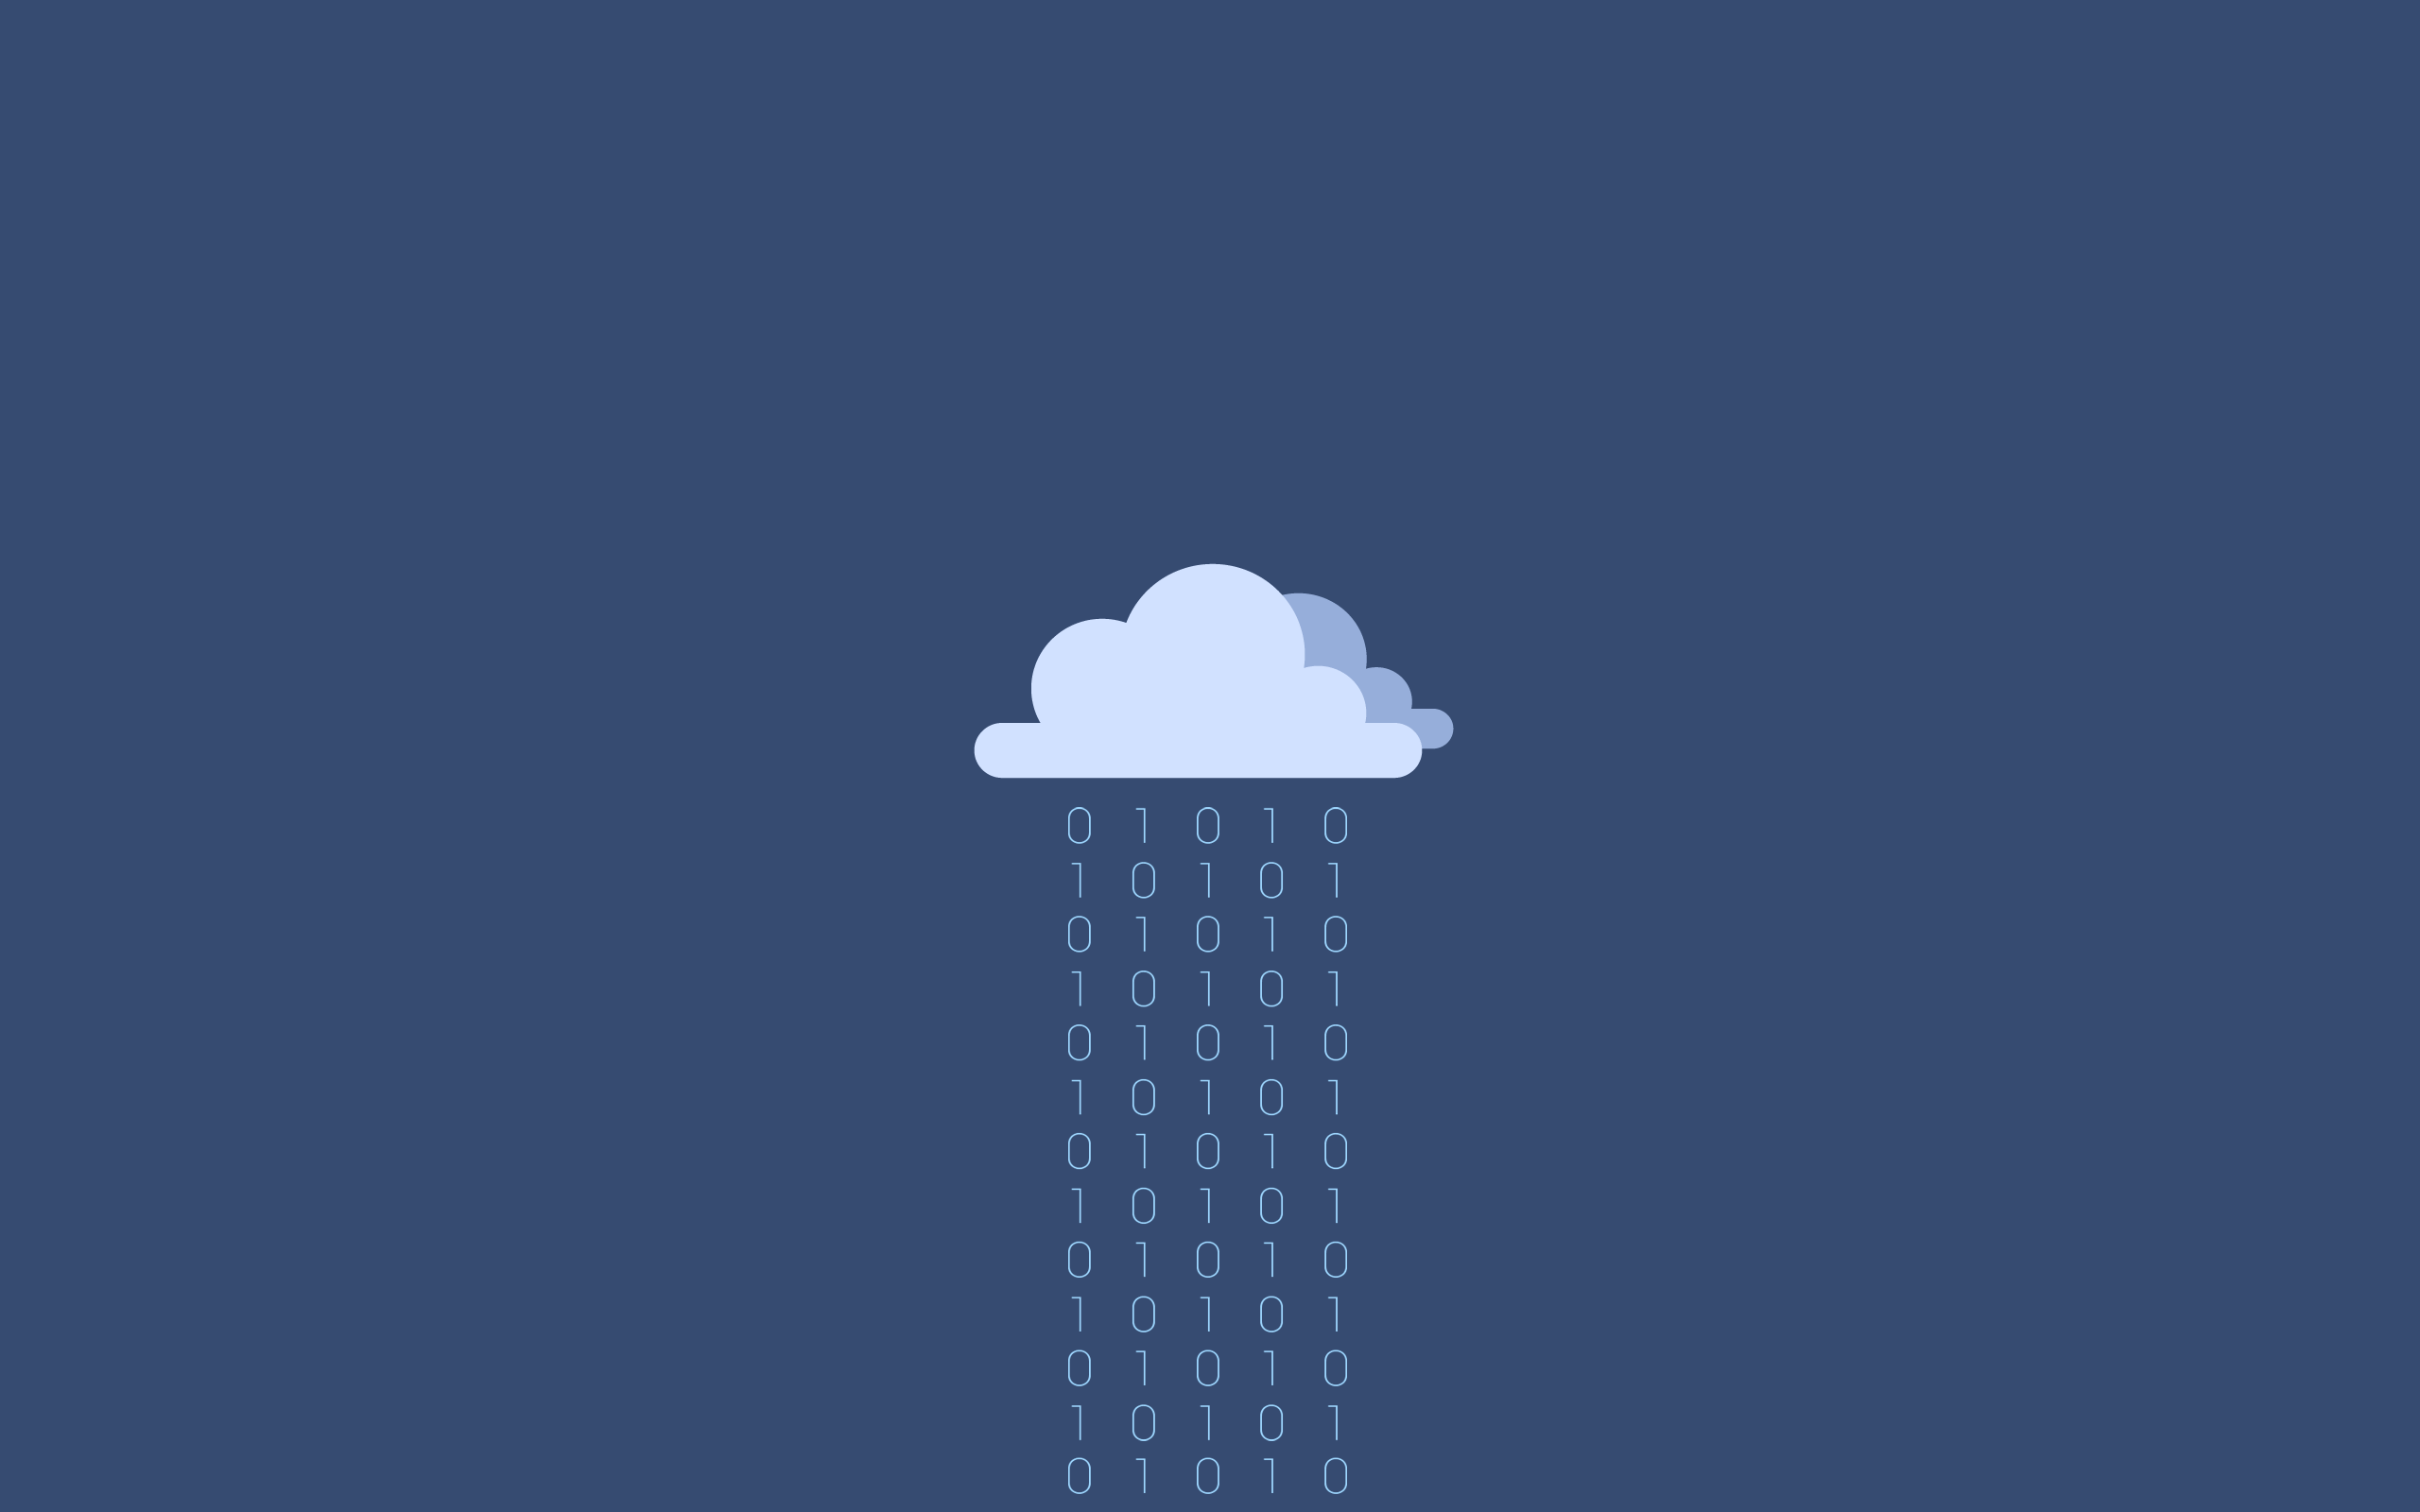 Cloud Wallpaper For Computers (1024x768 px, 119.59 Kb)